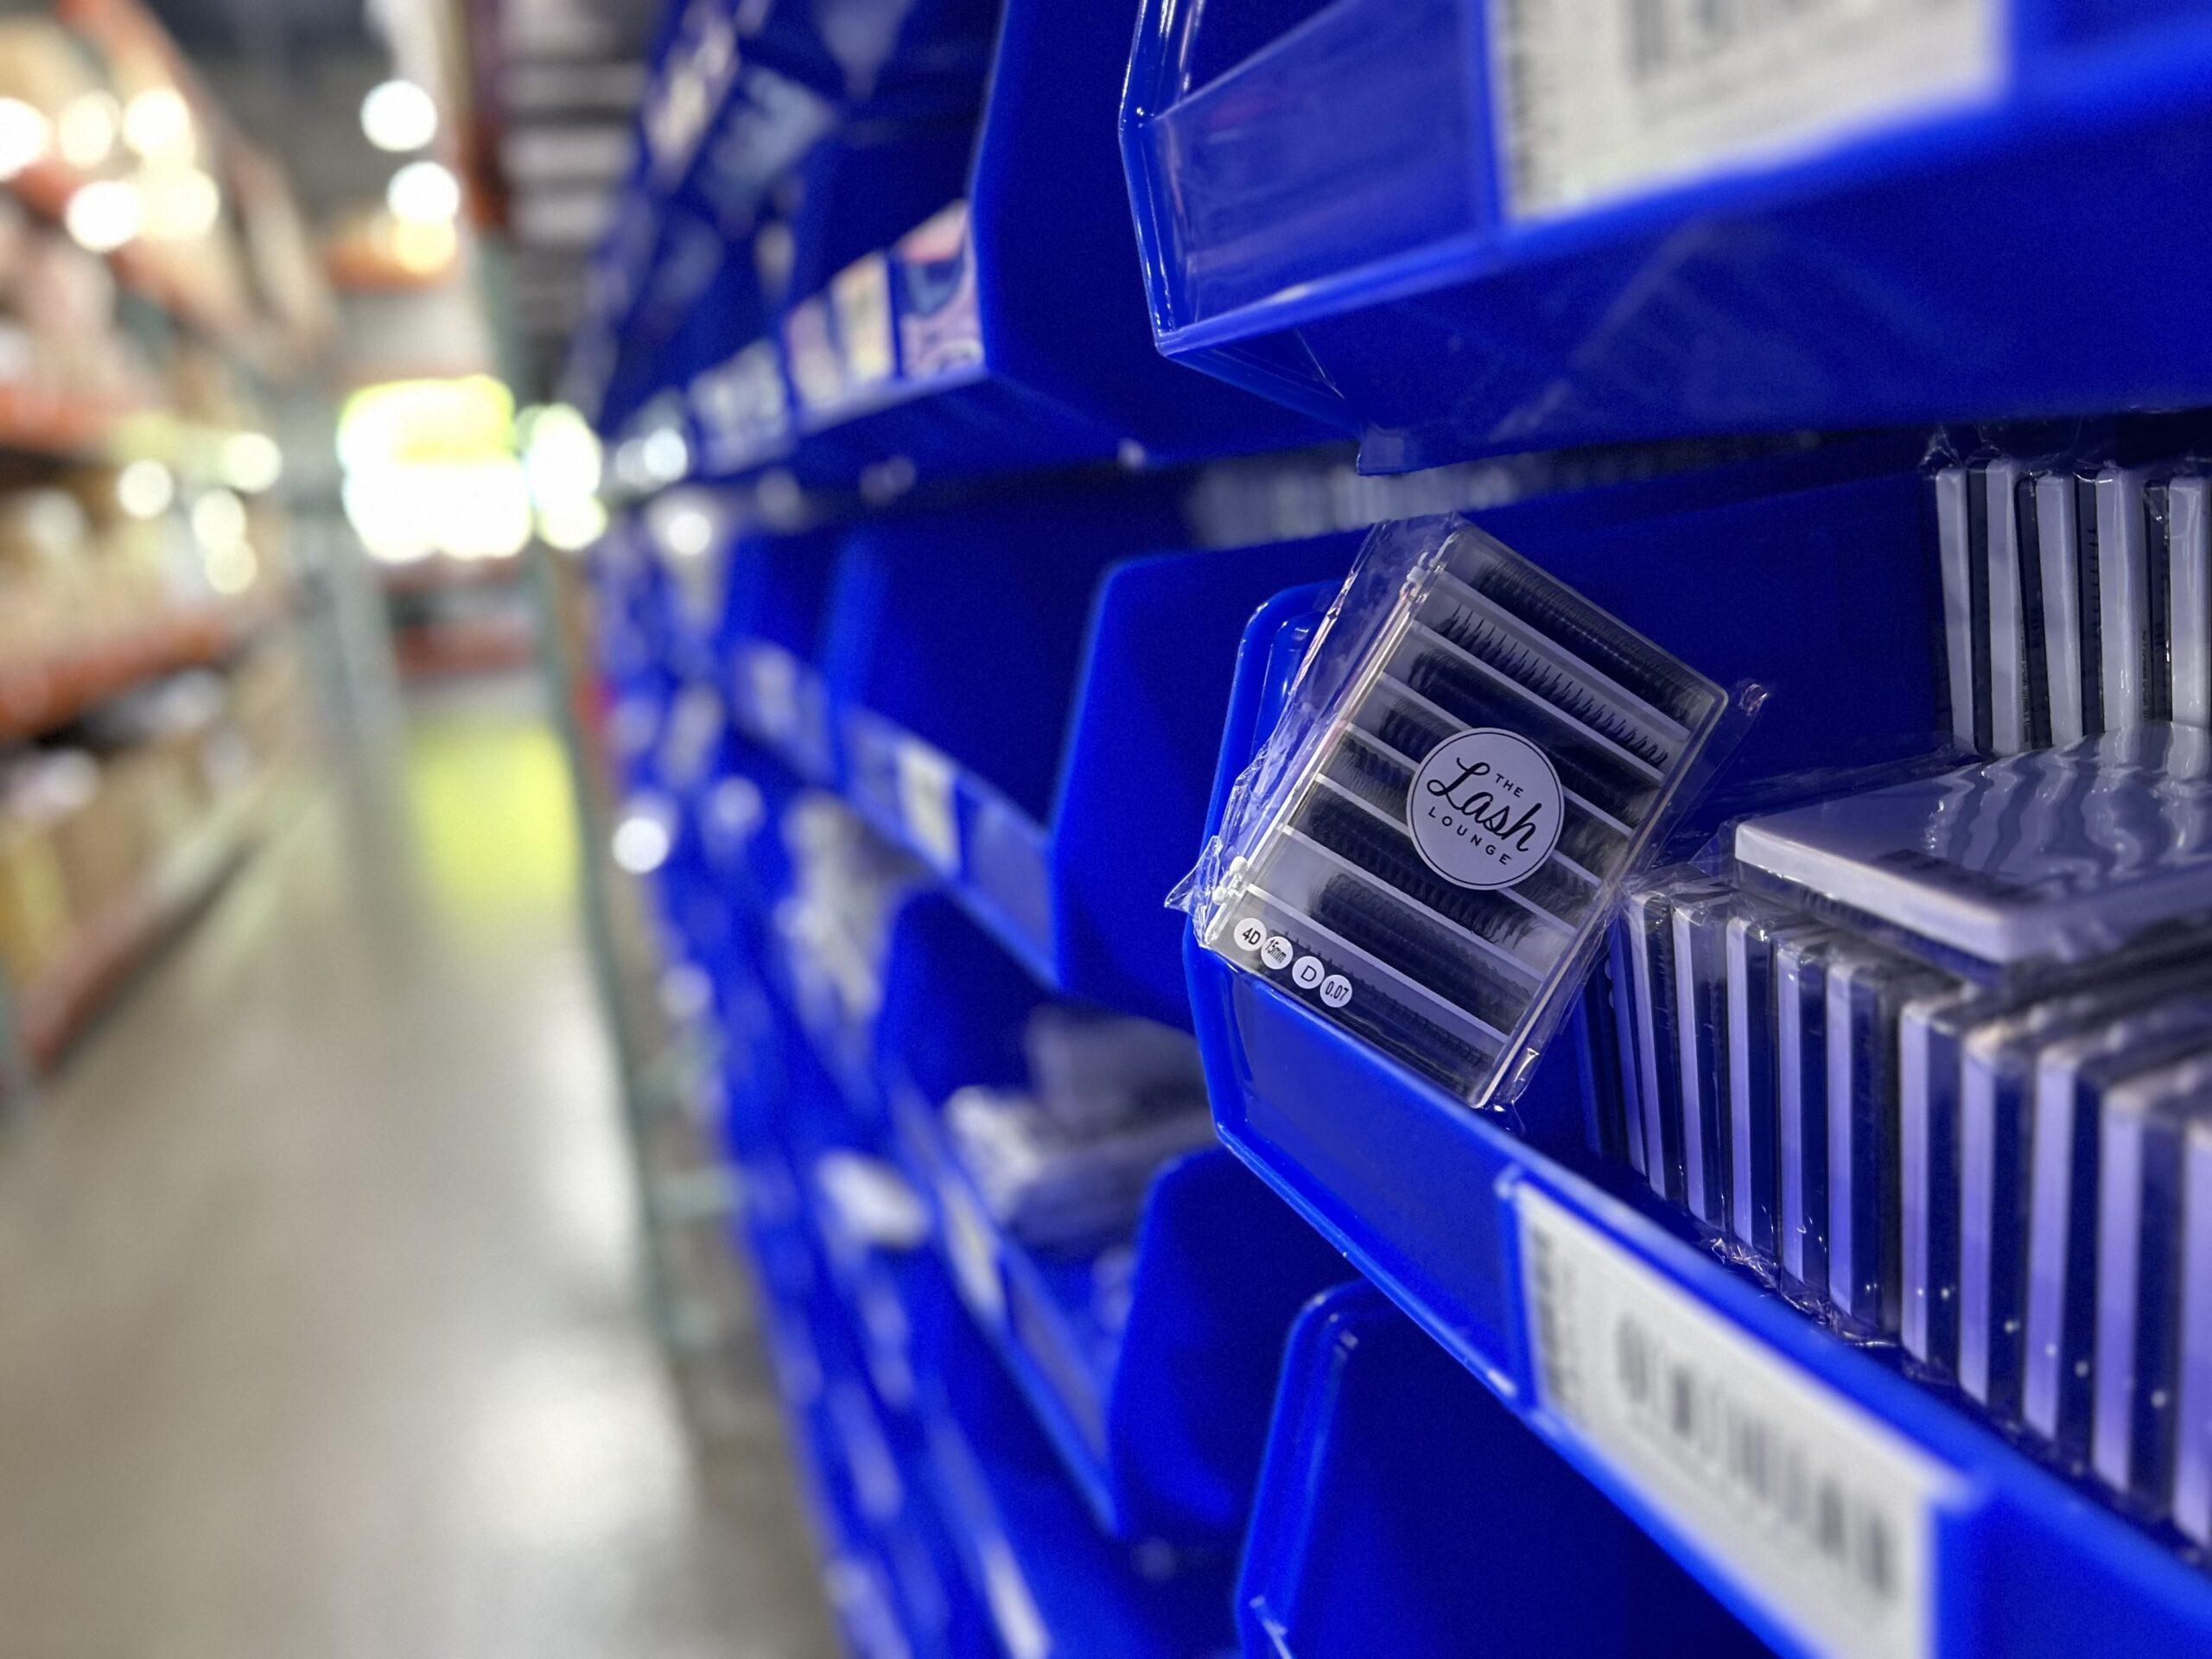 The Lash Lounge franchise's eyelash products stacked in blue bins in a warehouse.